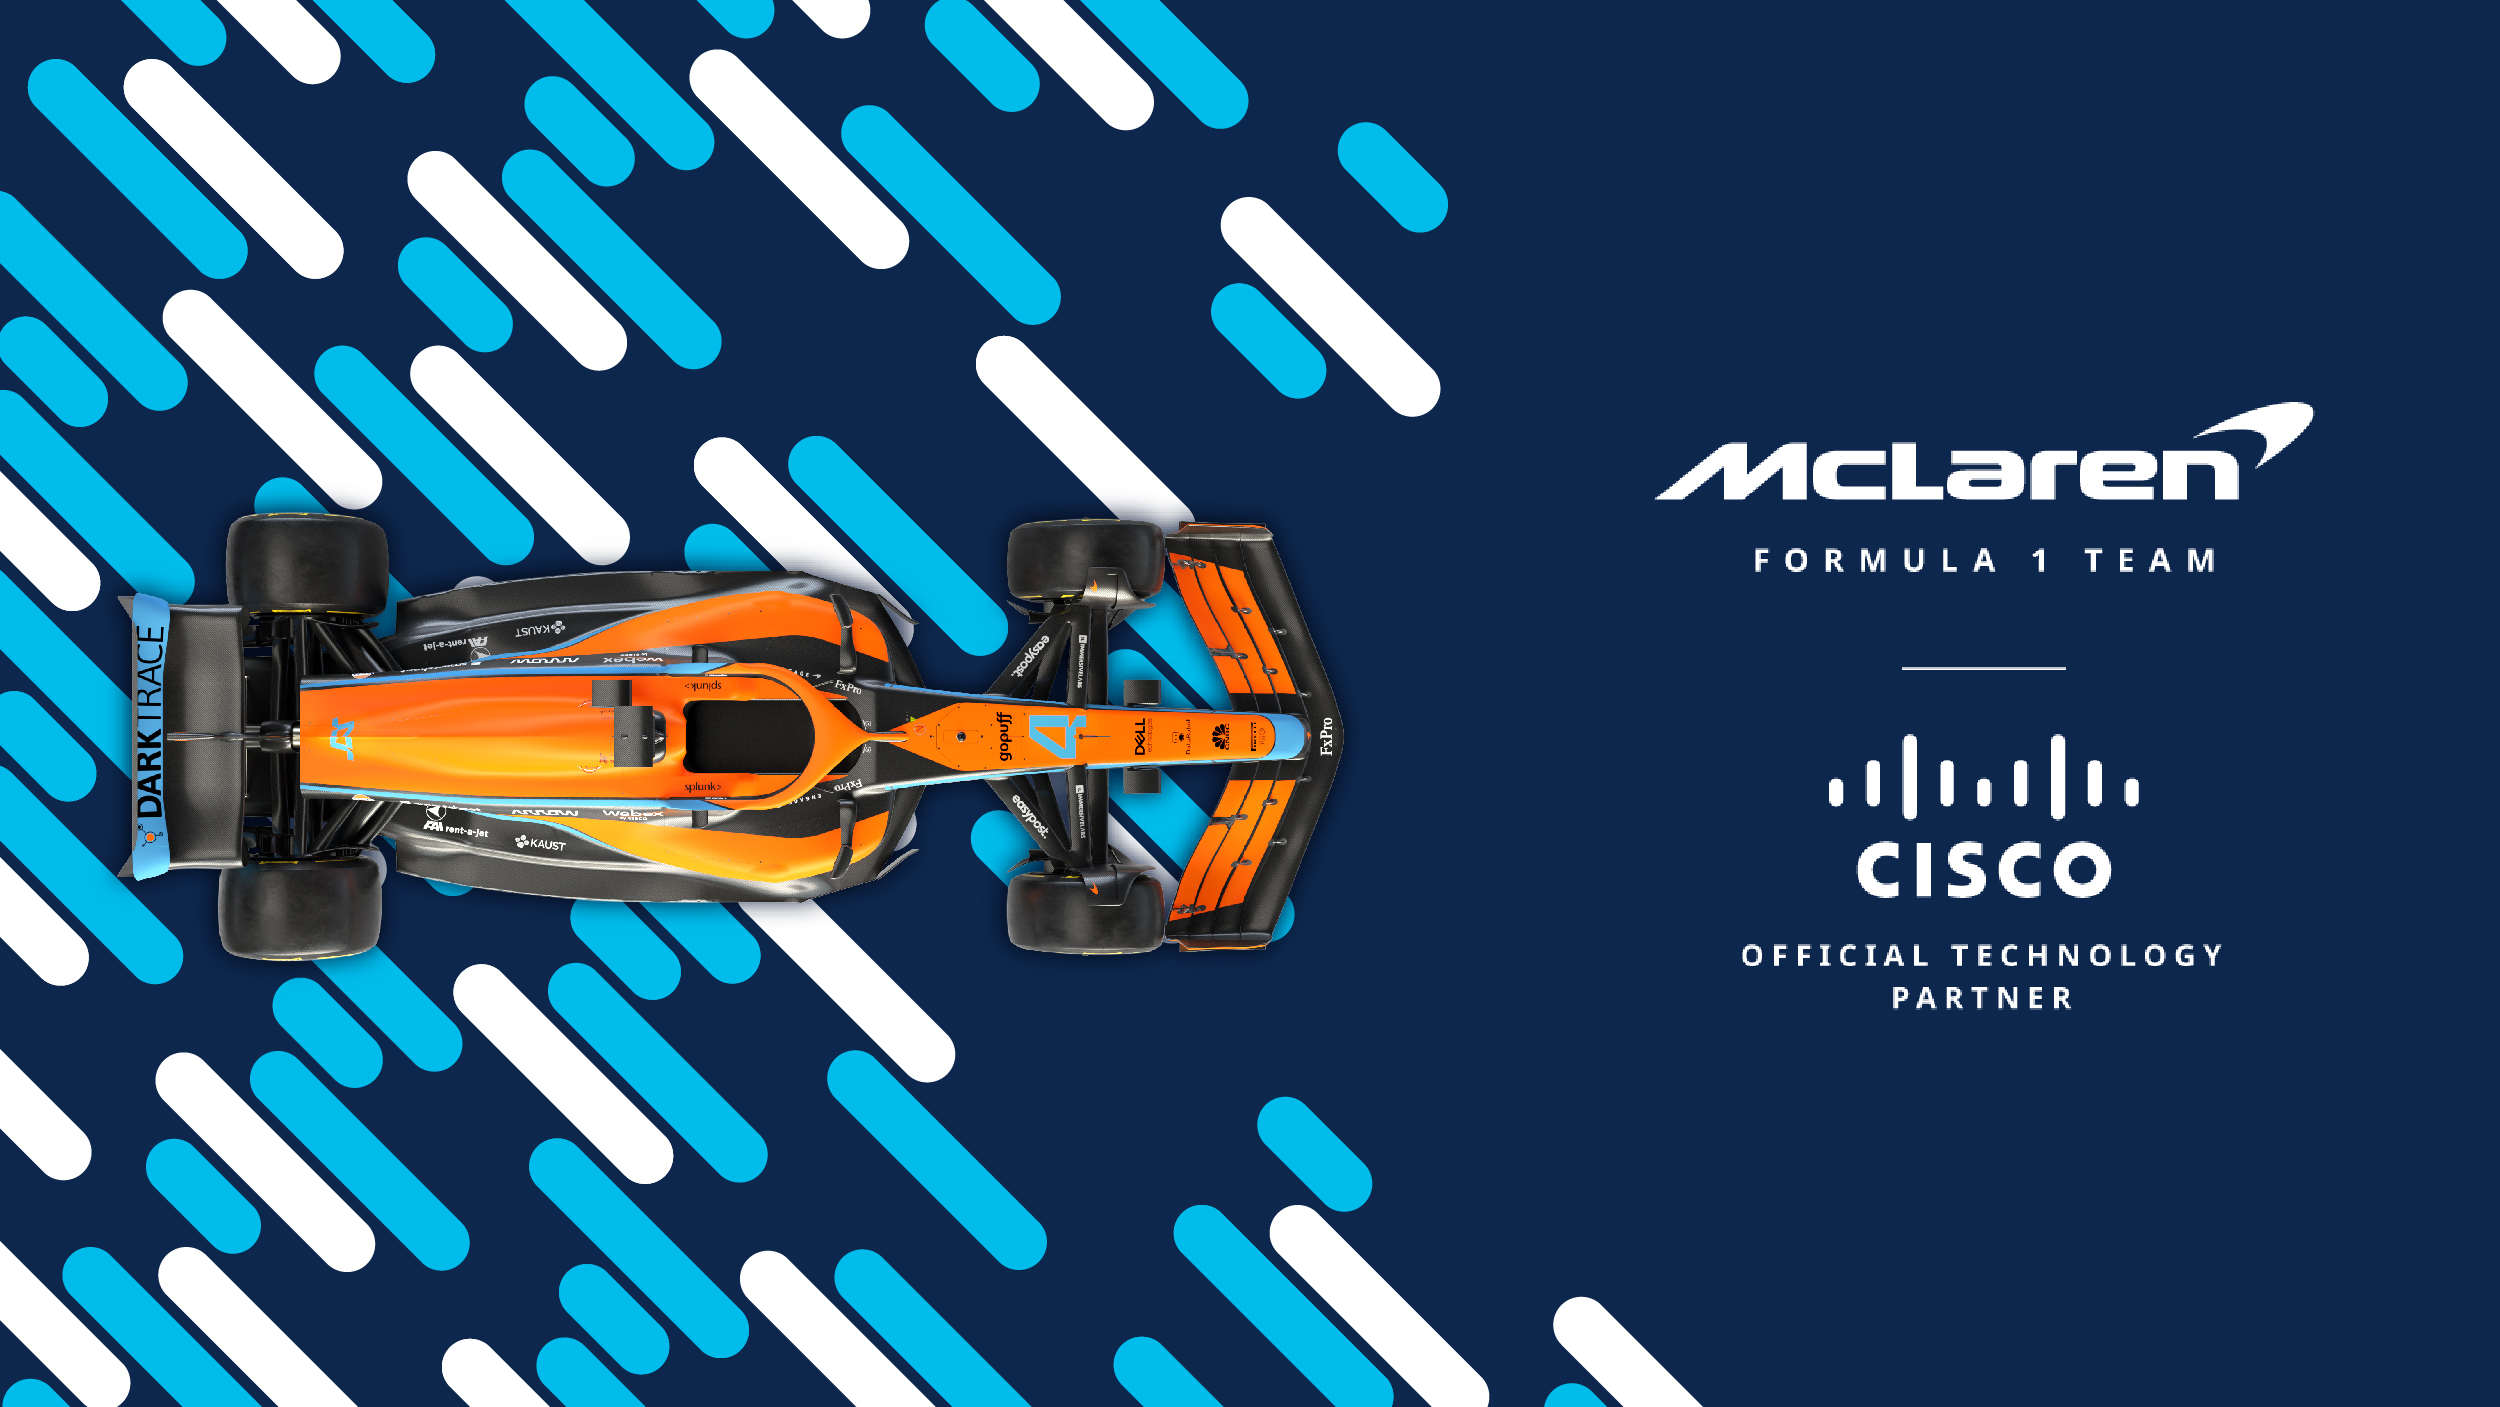 McLaren Racing, Cisco Partner to Drive Innovation and Hybrid Sporting Experiences Through Expanded Partnership